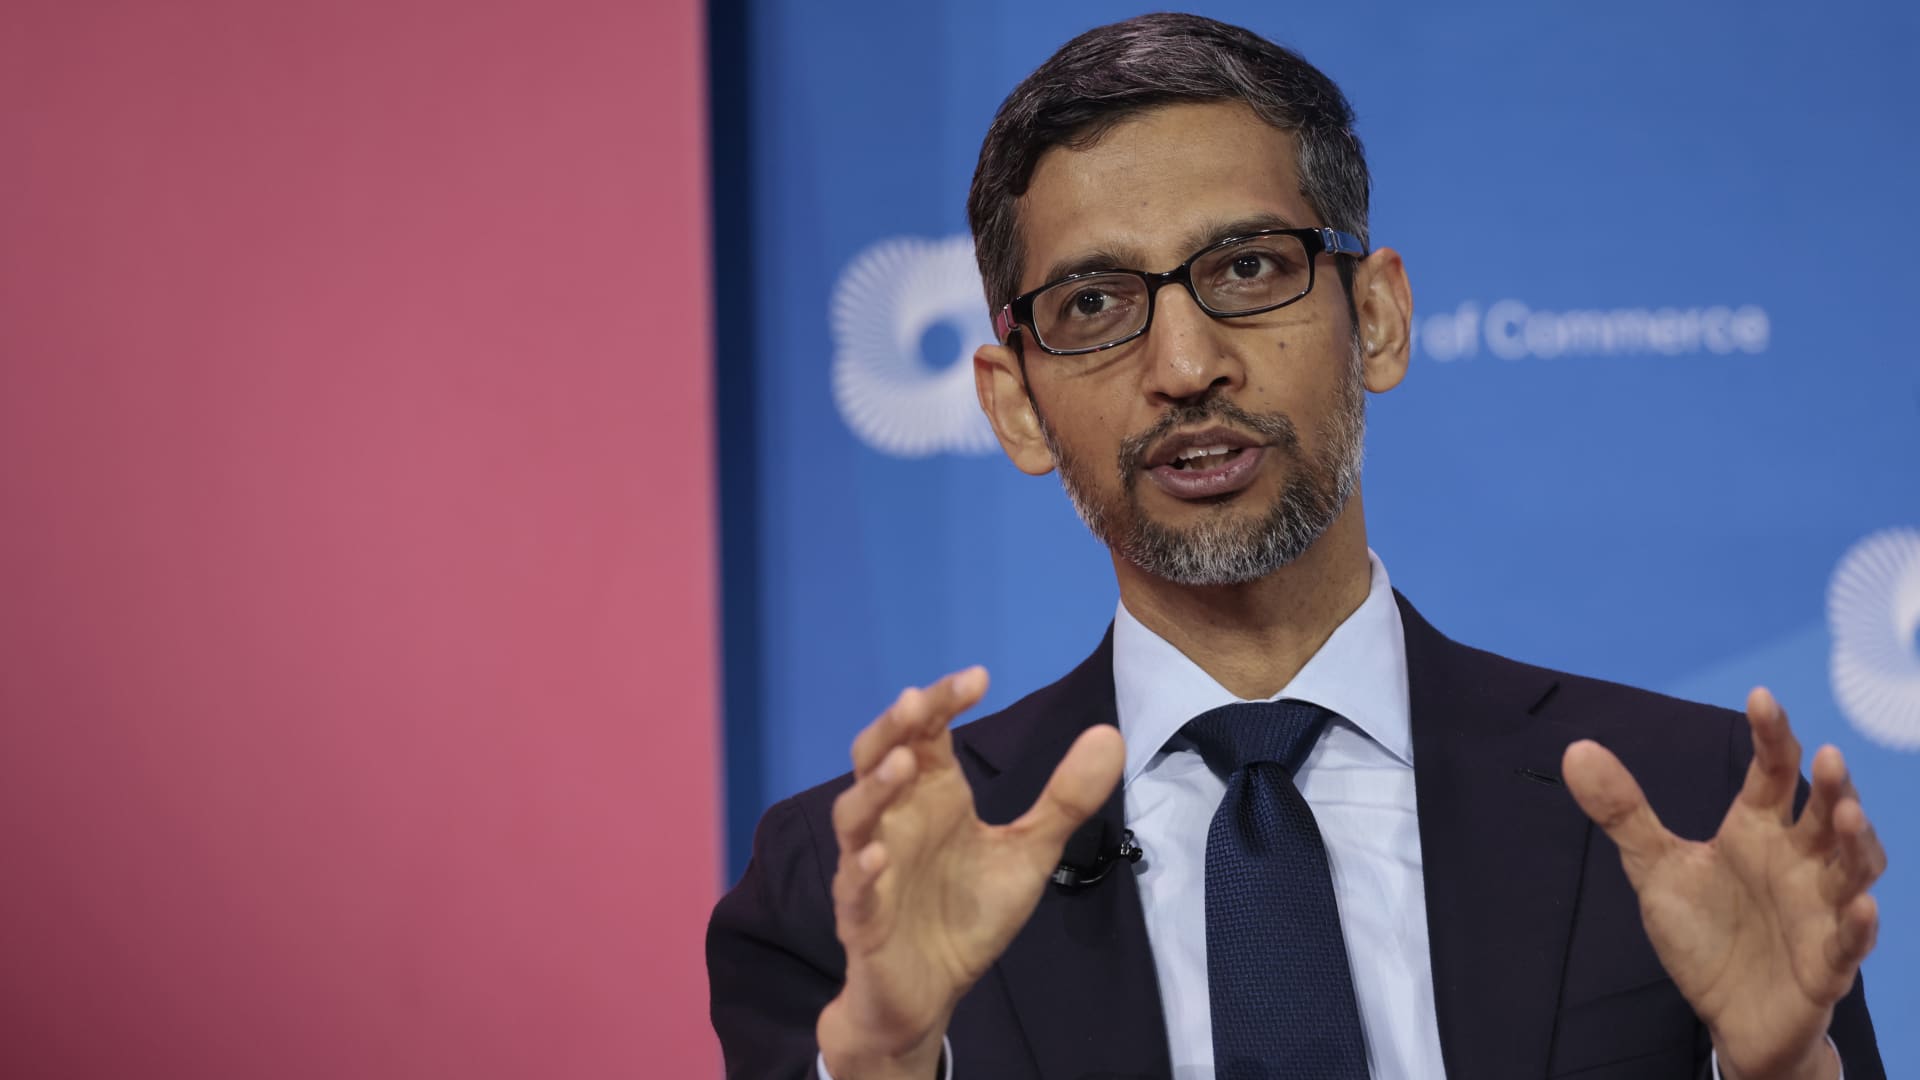 Google employees complain about CEO Sundar Pichai's pay raise as cost cuts hit rest of the company